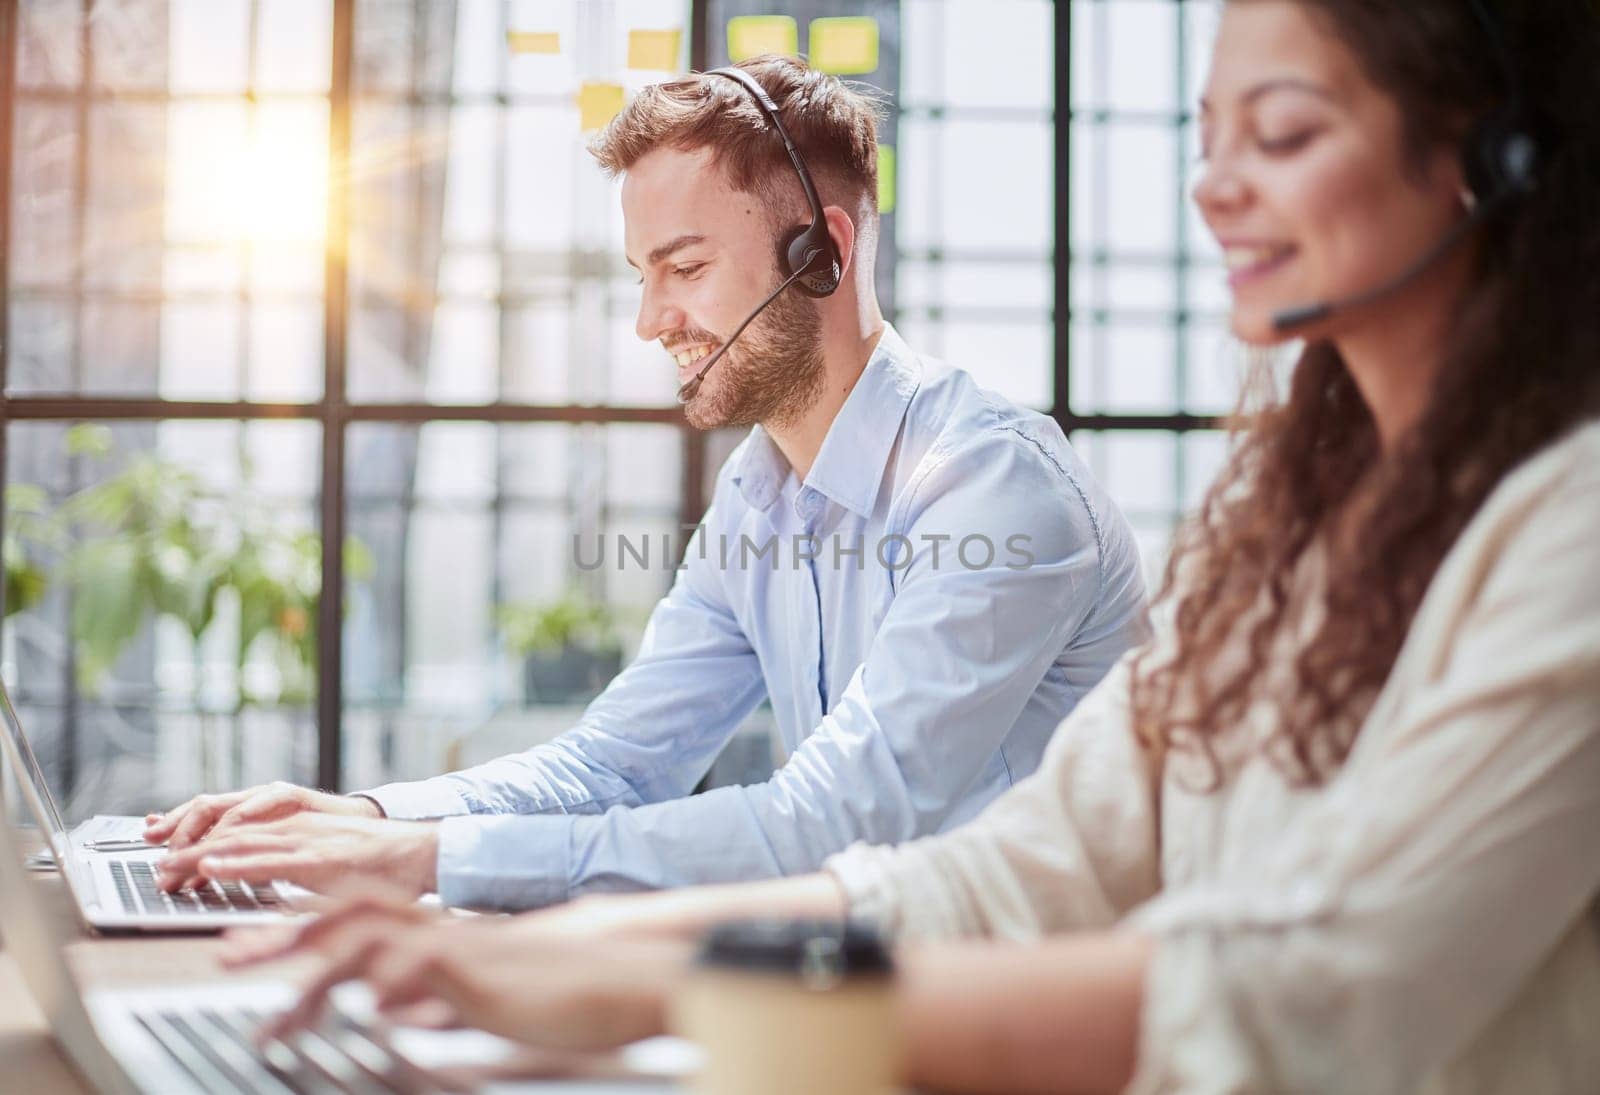 male call-center operator with headphones sitting at modern office, consulting online information in a laptop, looking up information in a file in order to be of assistance to the client.